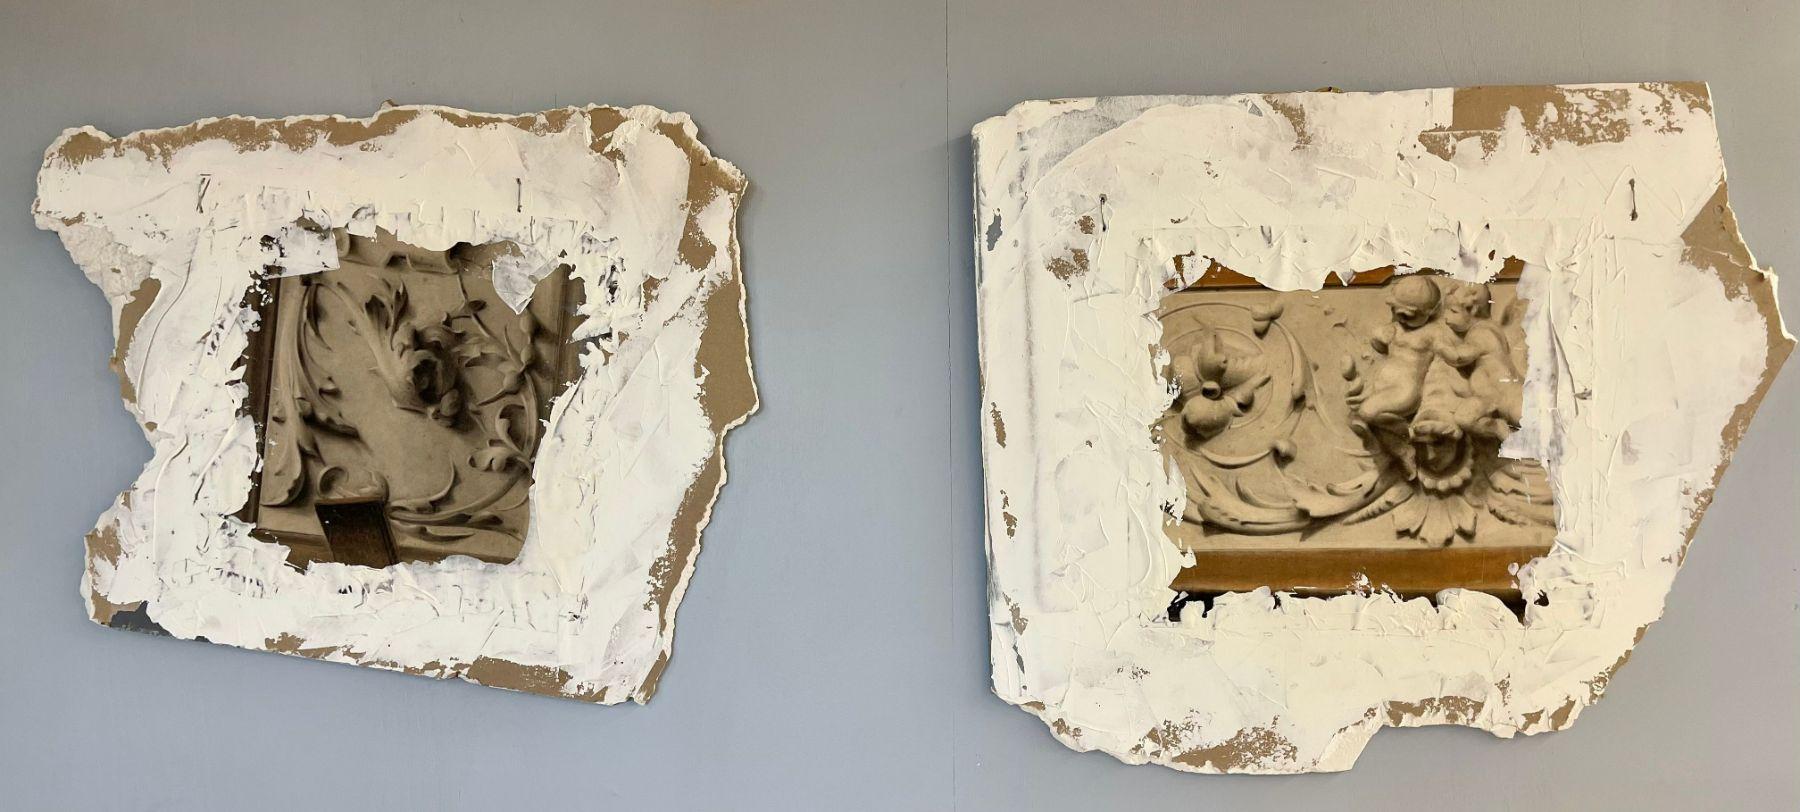 Pair of hand painted architectural wall fragments, Plaster, Italian, Venetian Style.